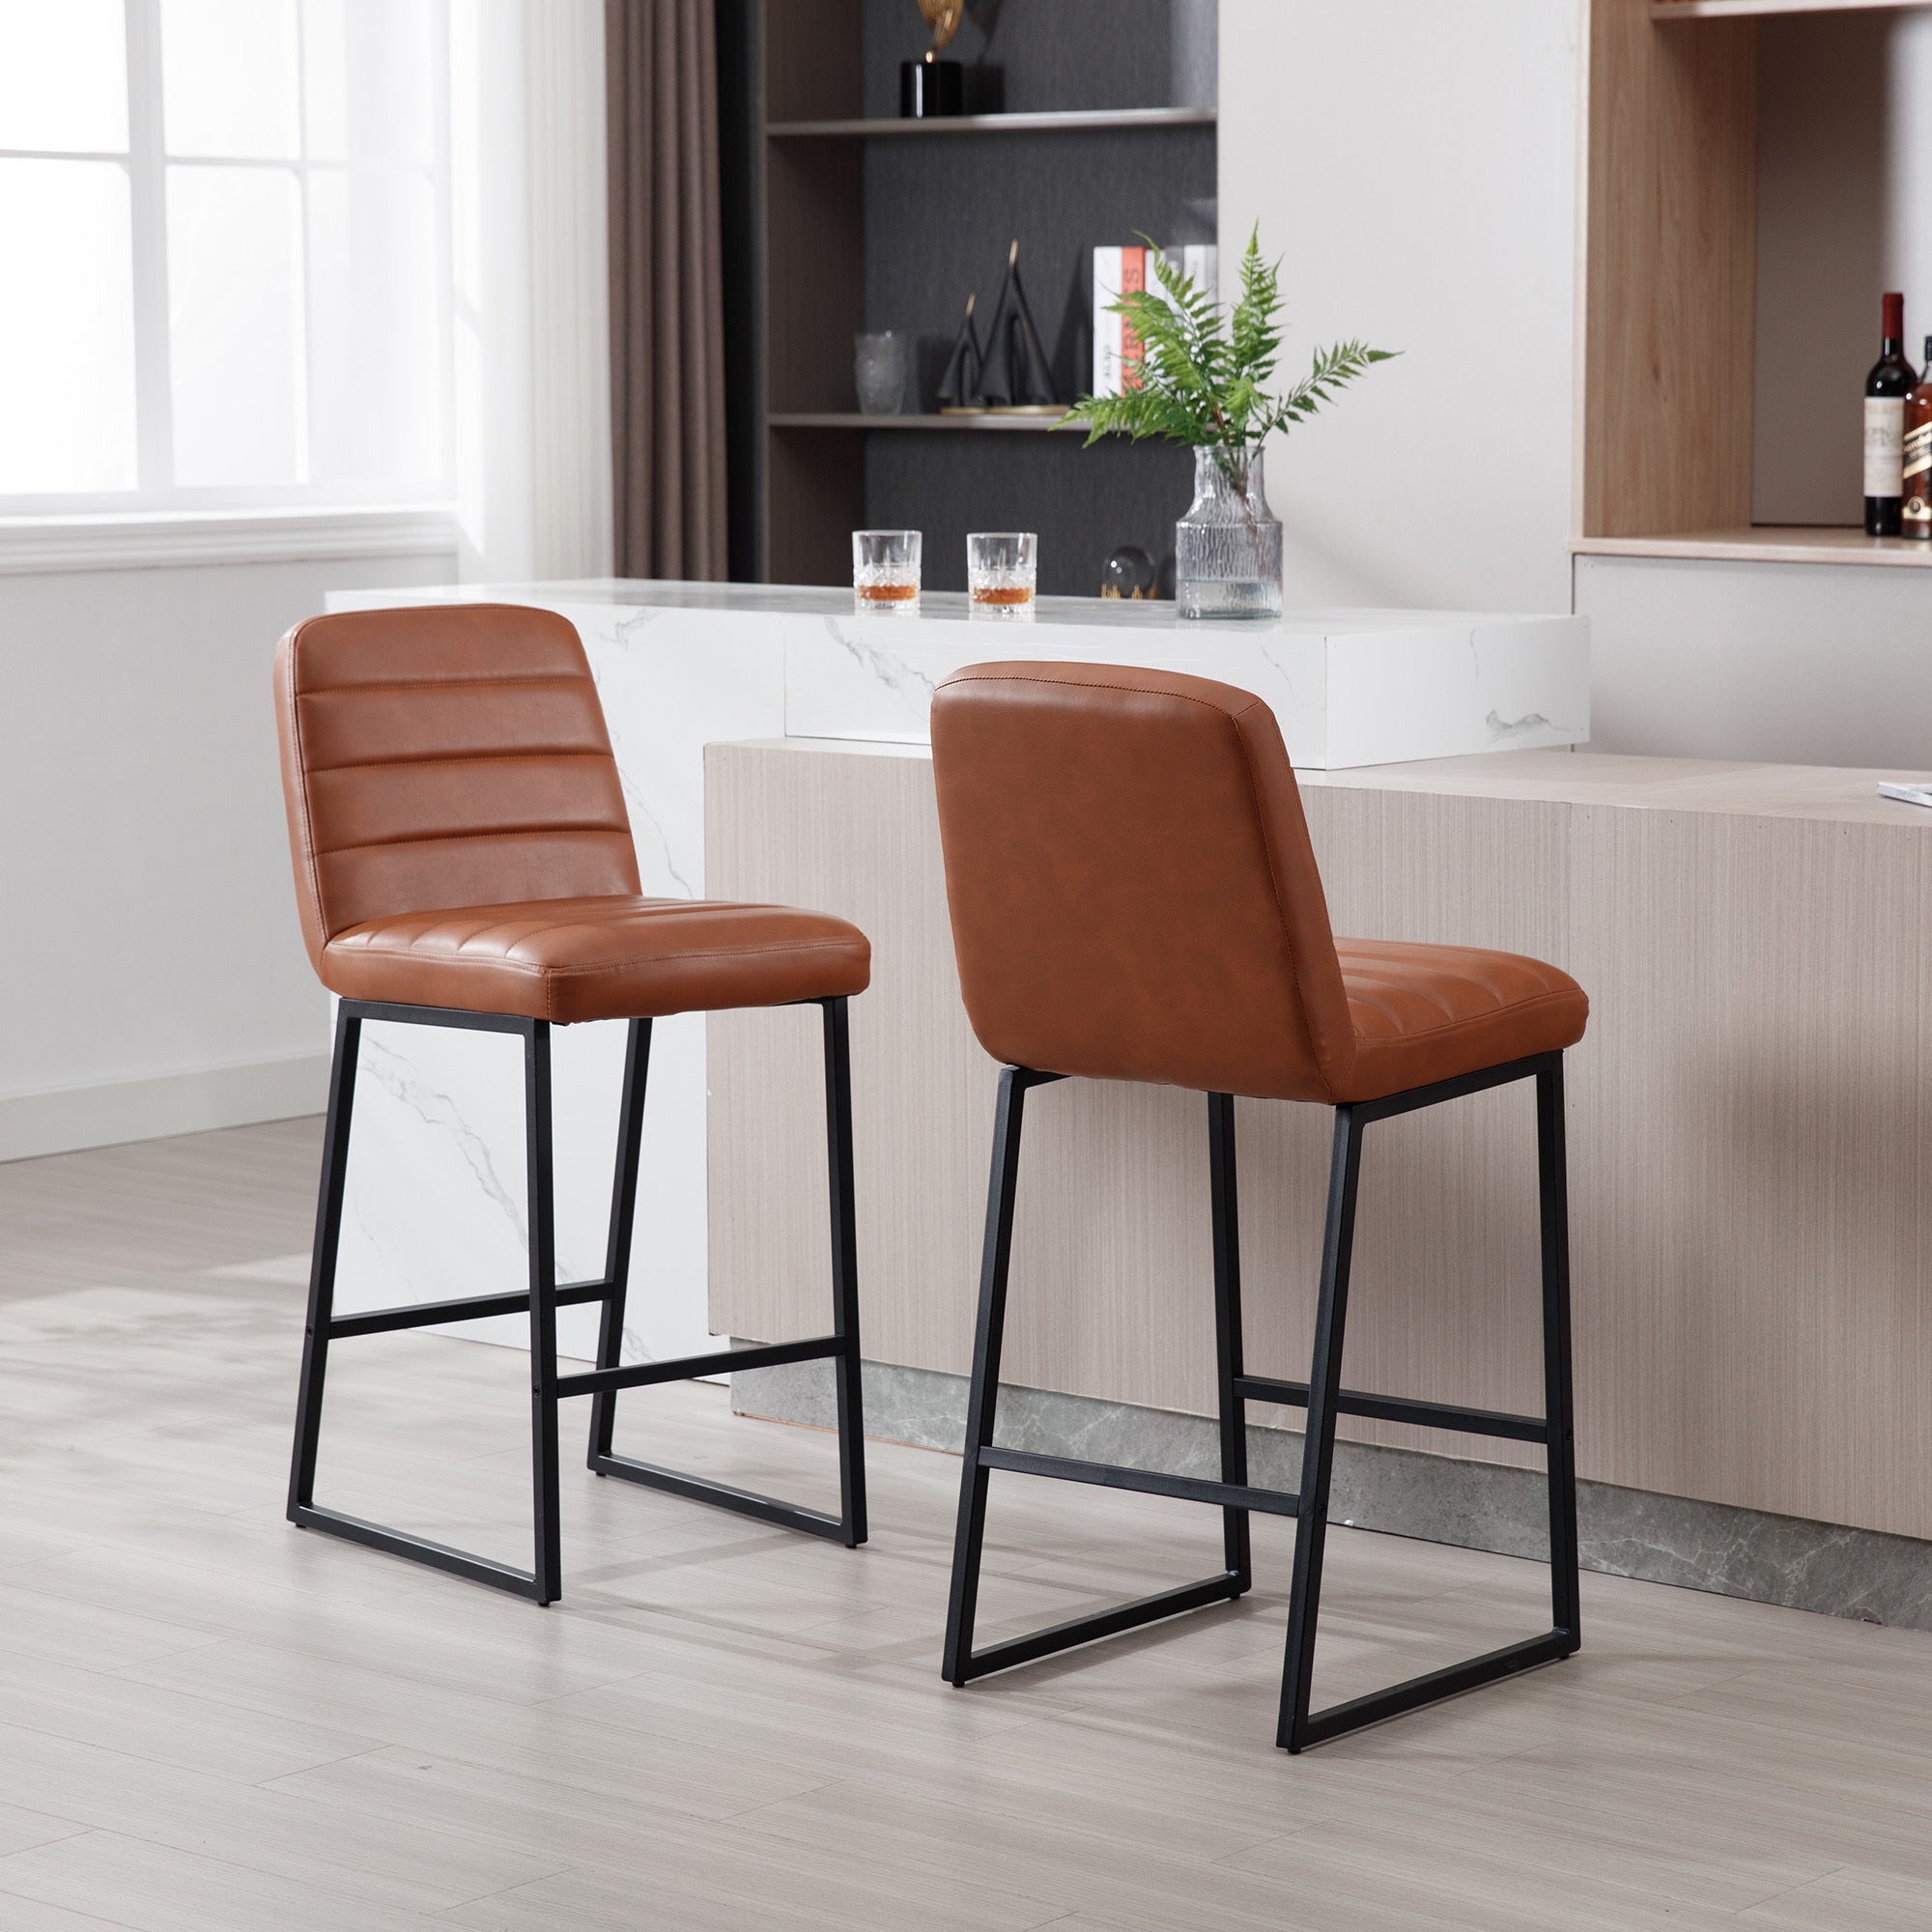 Low Bar Stools Set of 2 Bar Chairs for Living Room brown pu-kitchen-foam-dry clean-modern-bar